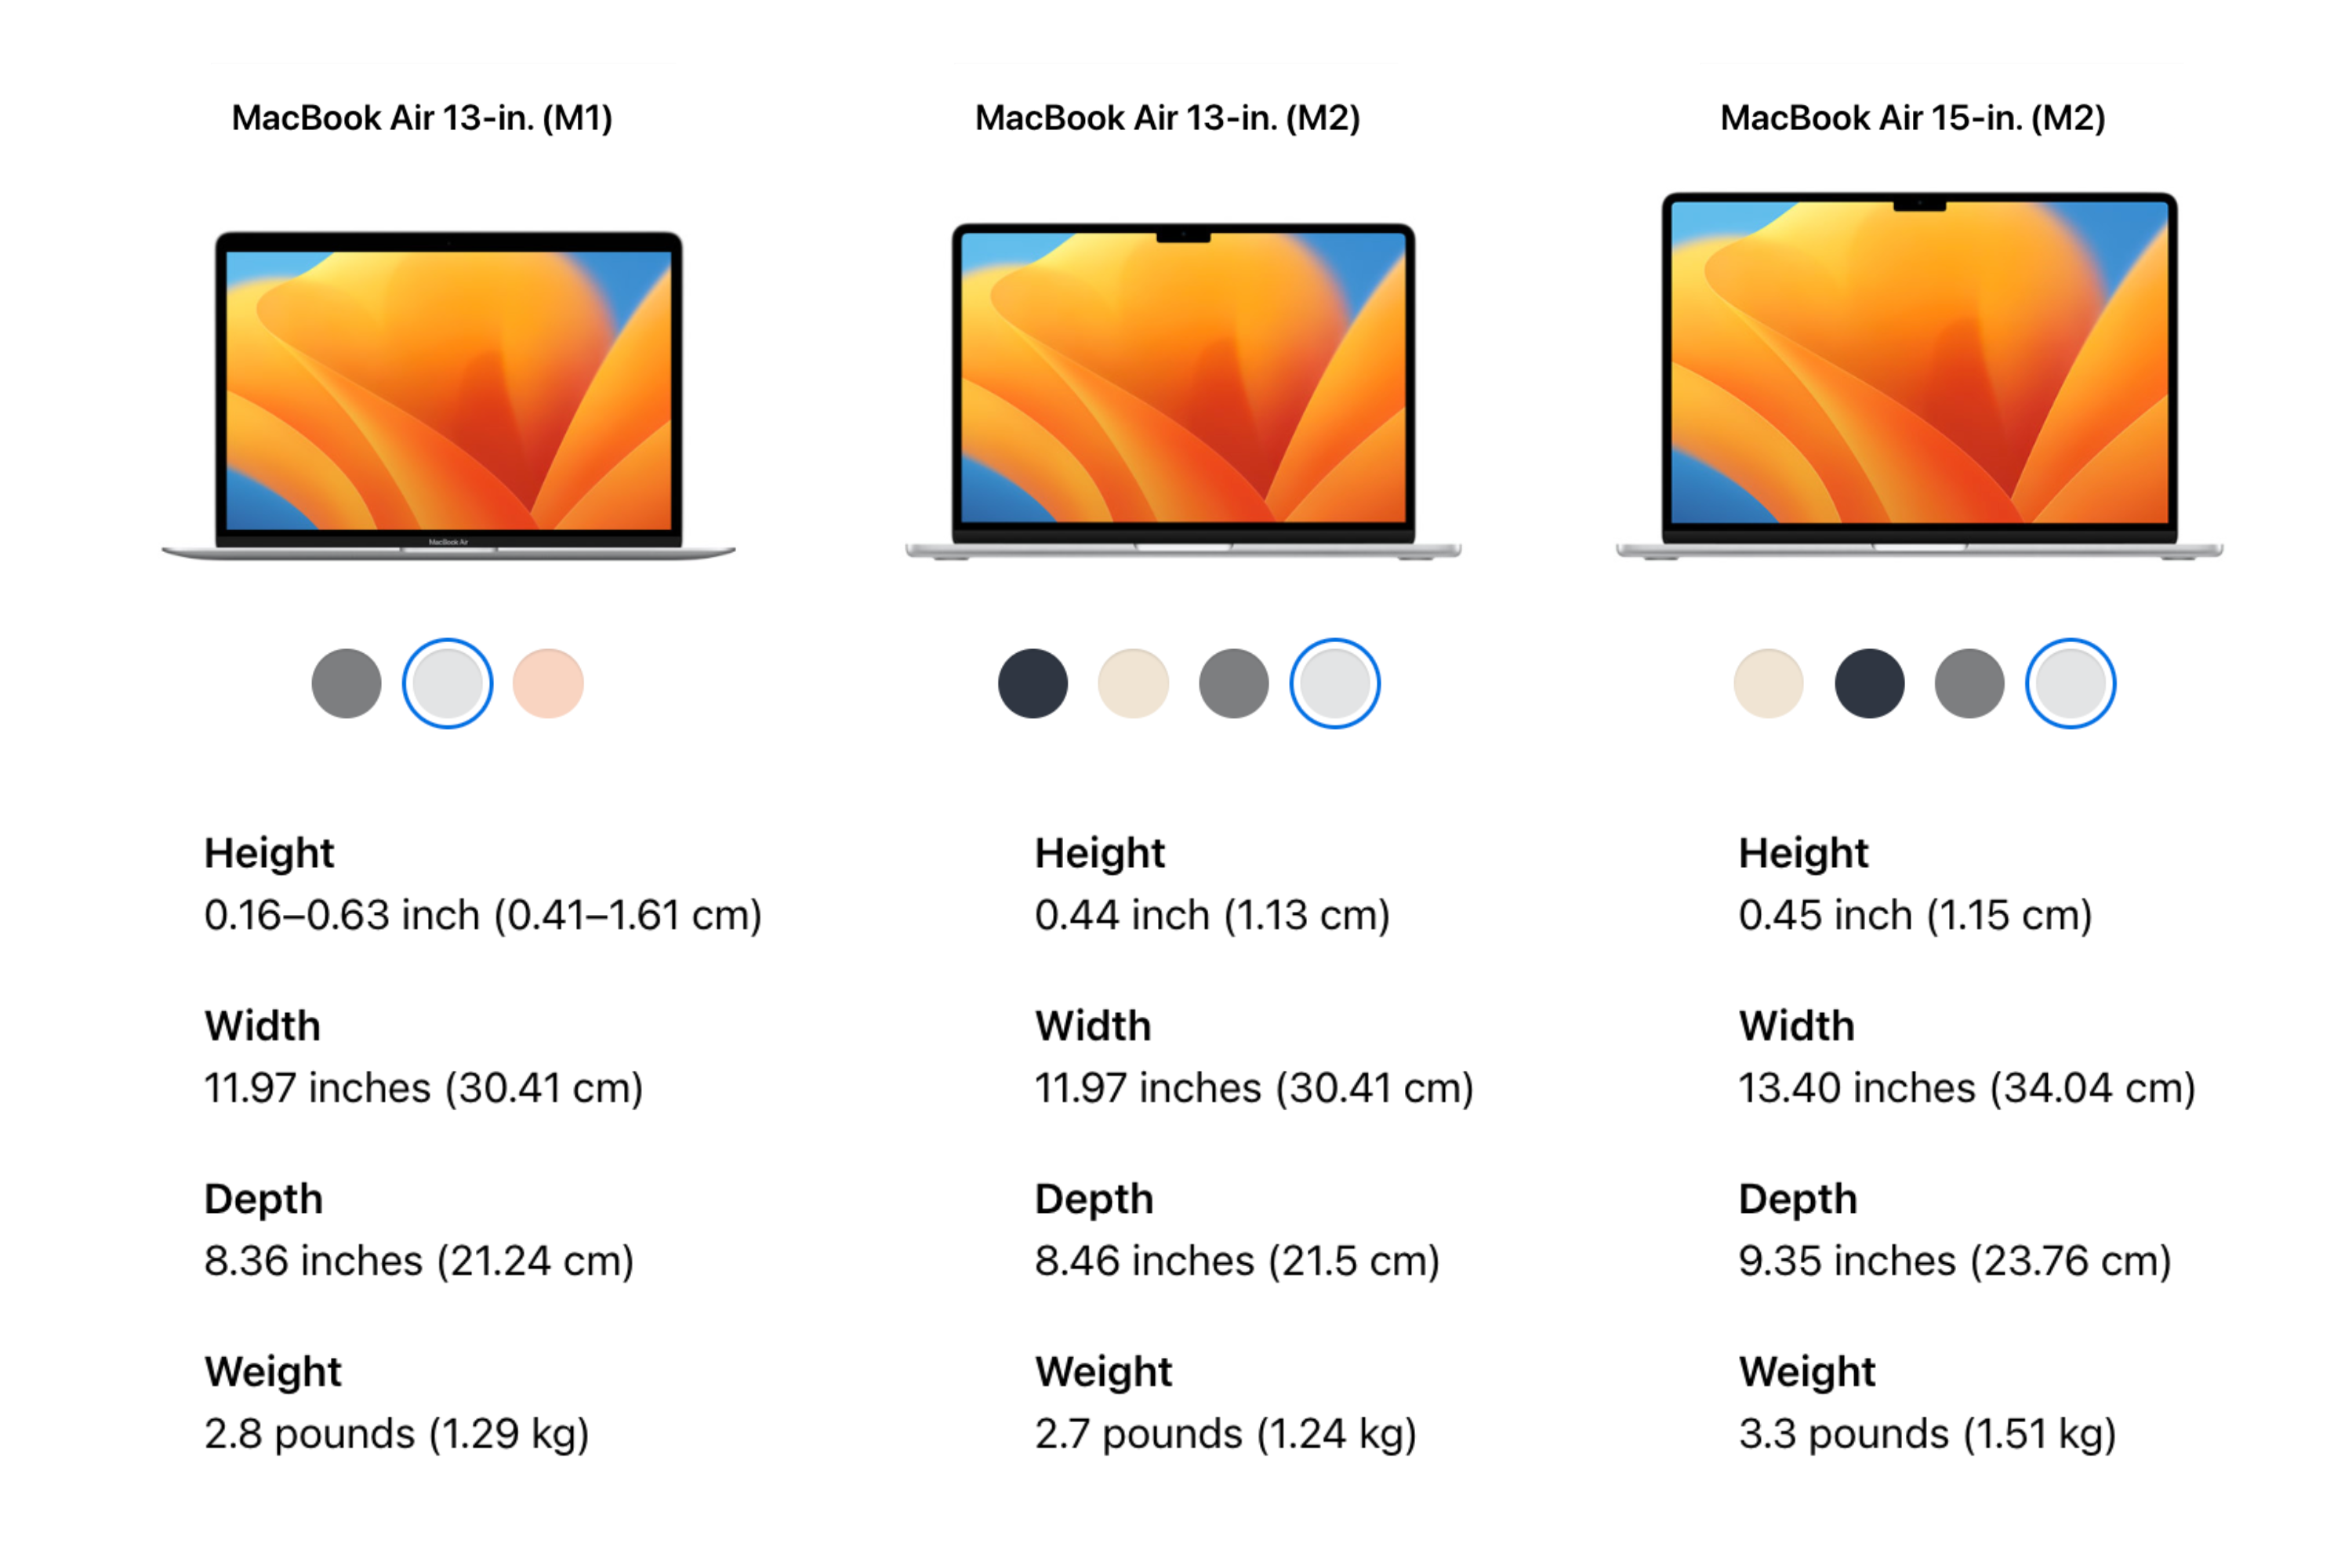 Apple MacBook Air lineup with 2020, 2022, and 2023 models 